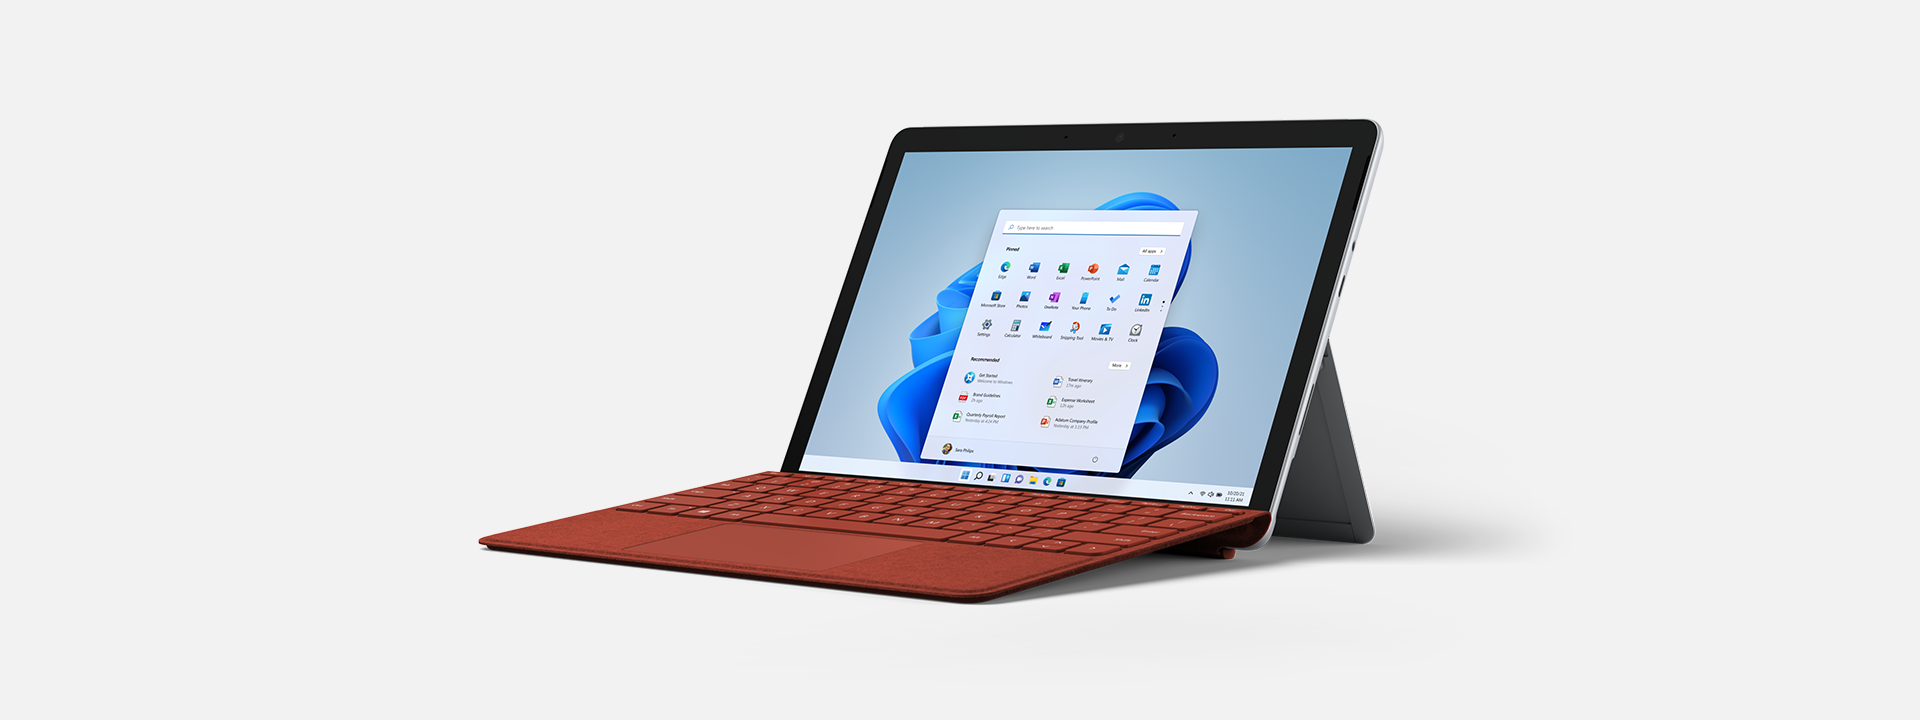 Surface Go 3 for Business propped on kickstand showing screen and keyboard.